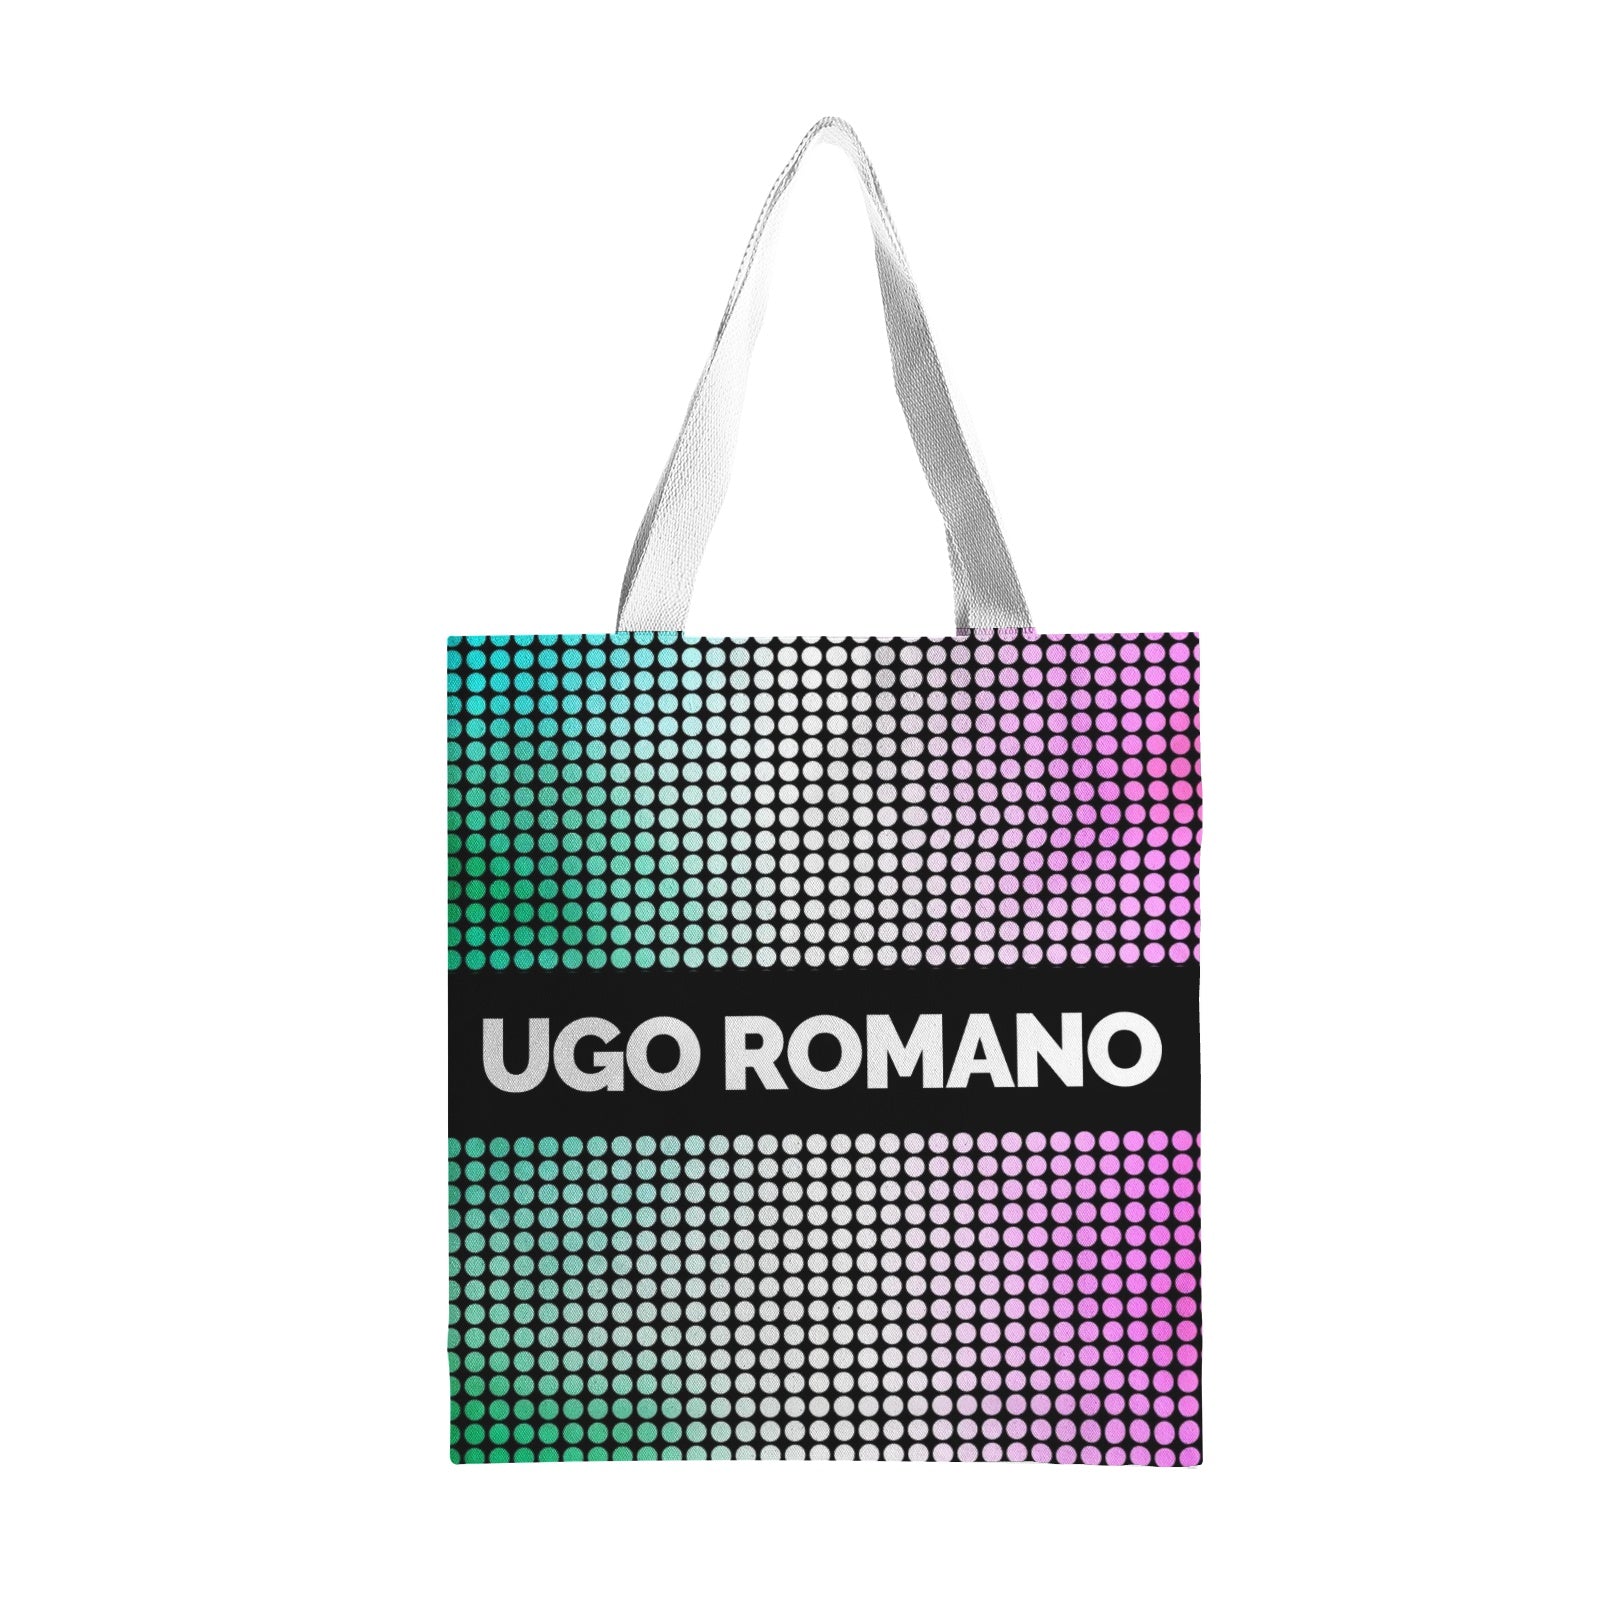 Heavy Duty and Strong Natural Cotton Canvas Tote Bag - UGO ROMANO URTB056